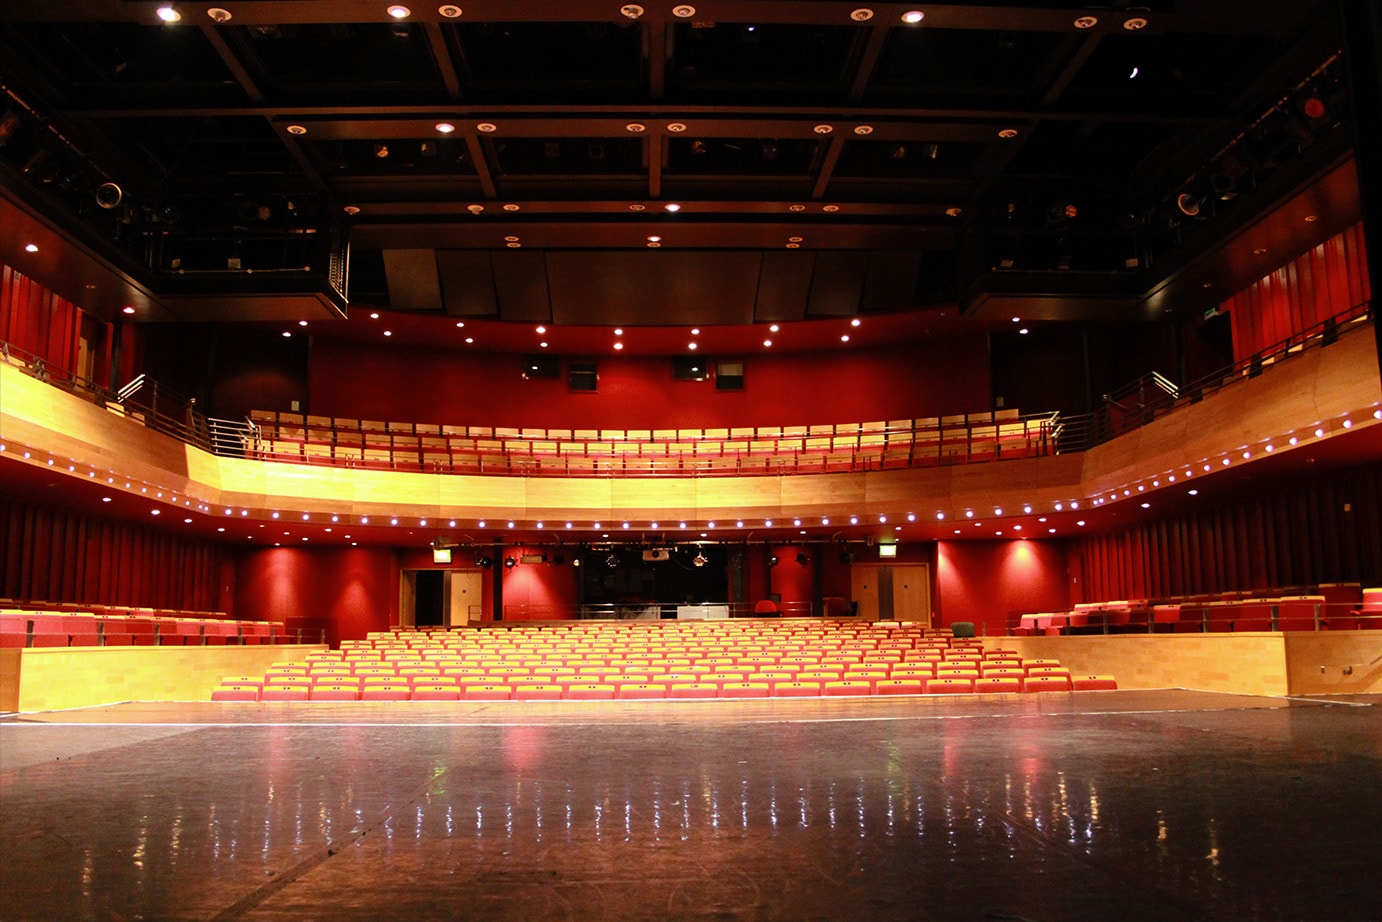 A high quality photograph of artsdepot's Pentland Theatre auditorium, photographed from the stage, offering an expansive view of the seating. The auditorium is dark red with wooden seating. Stage lights illuminate the image.